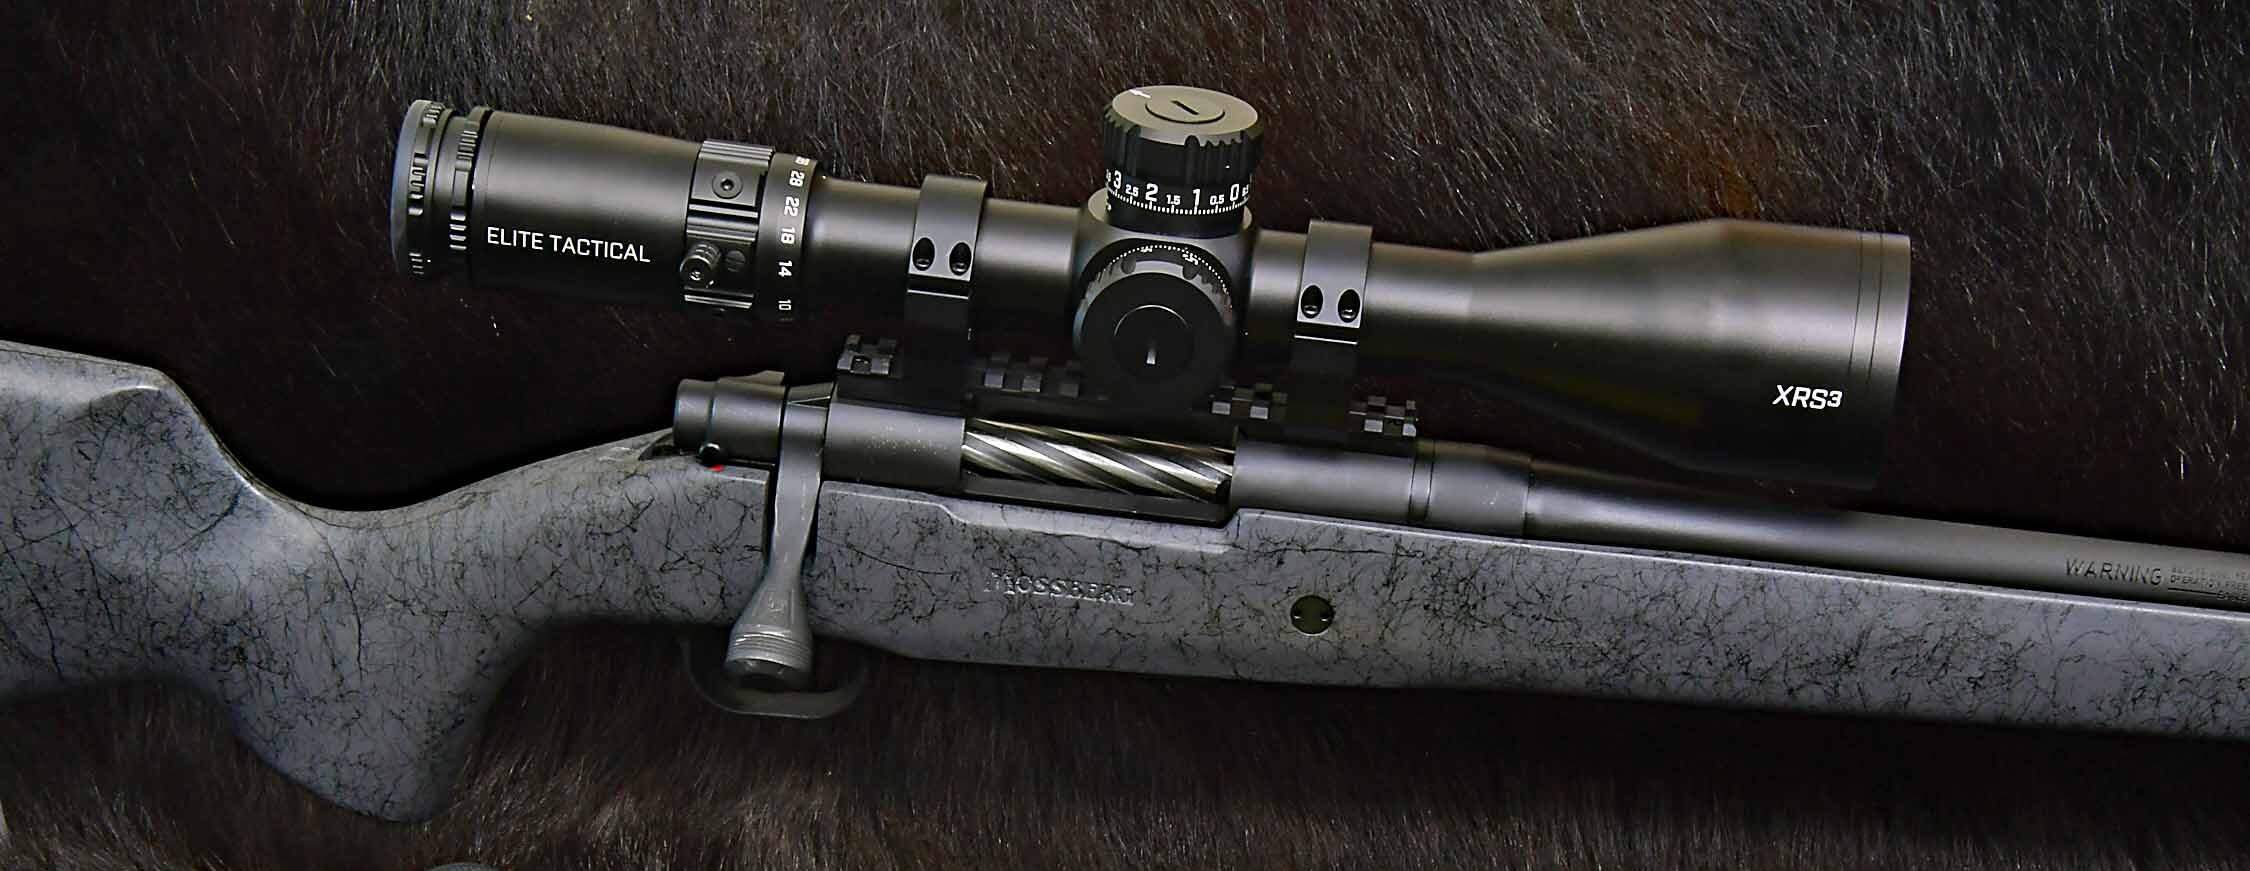 Mossberg Patriot and Bushnell Scope